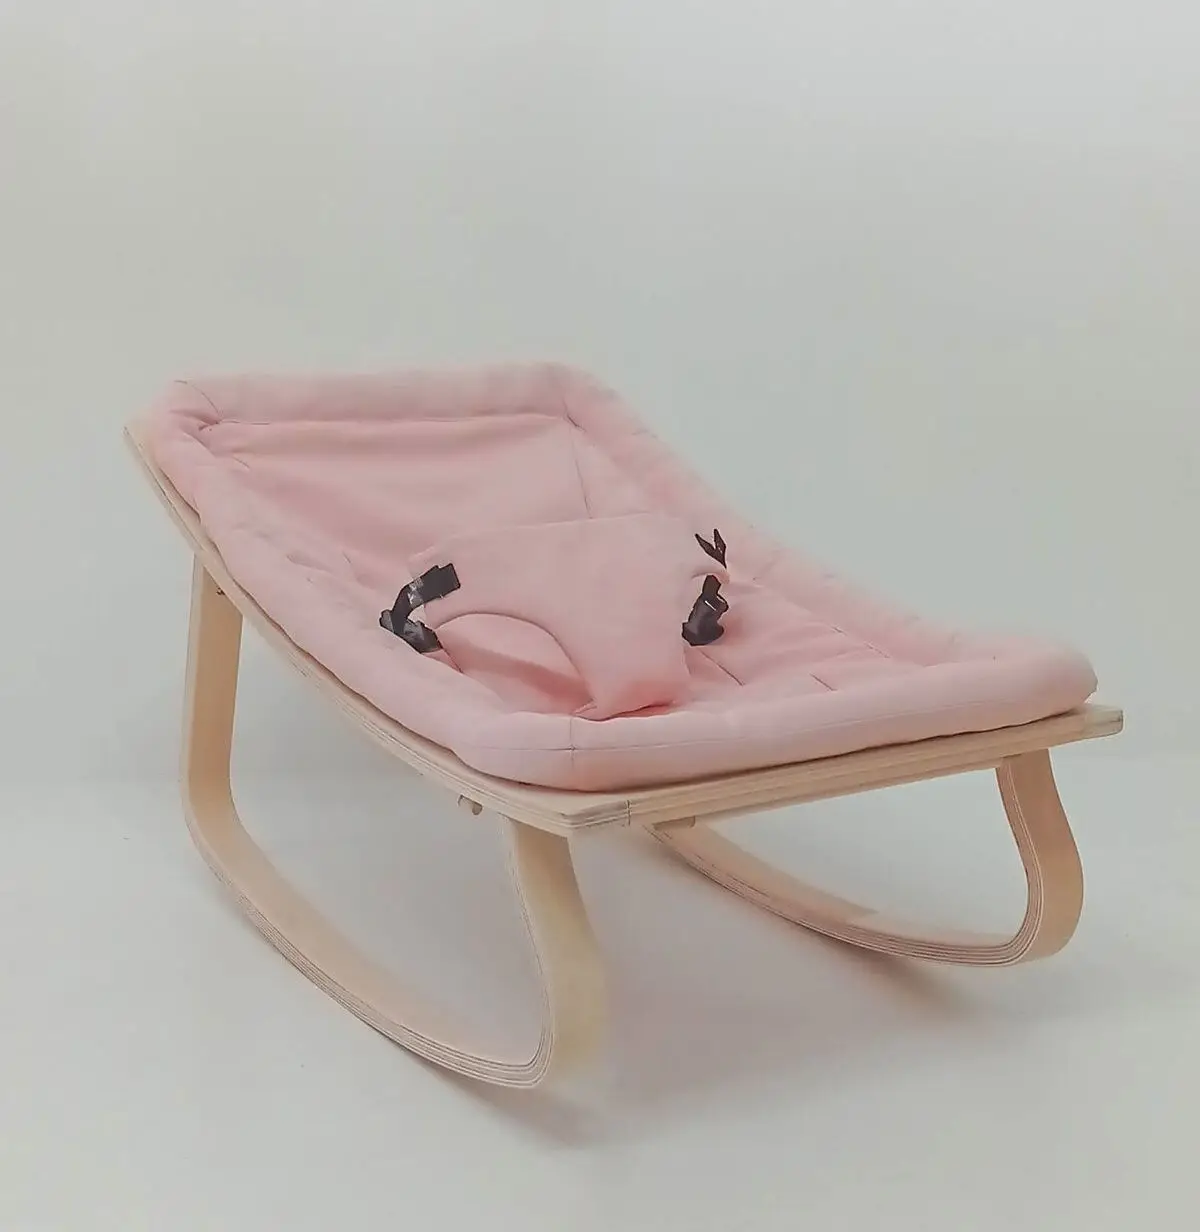 TurQuality Natural Hornbeam Wooden Baby Rocker With Sponge Bed New Born Wood Cradle Crib Lit Bedstead Baby Swing Mukabo Baby Rocker Furniture Girl Boy Clothes Maternity Mother Kids Baby Room Accessories Free DropShipin